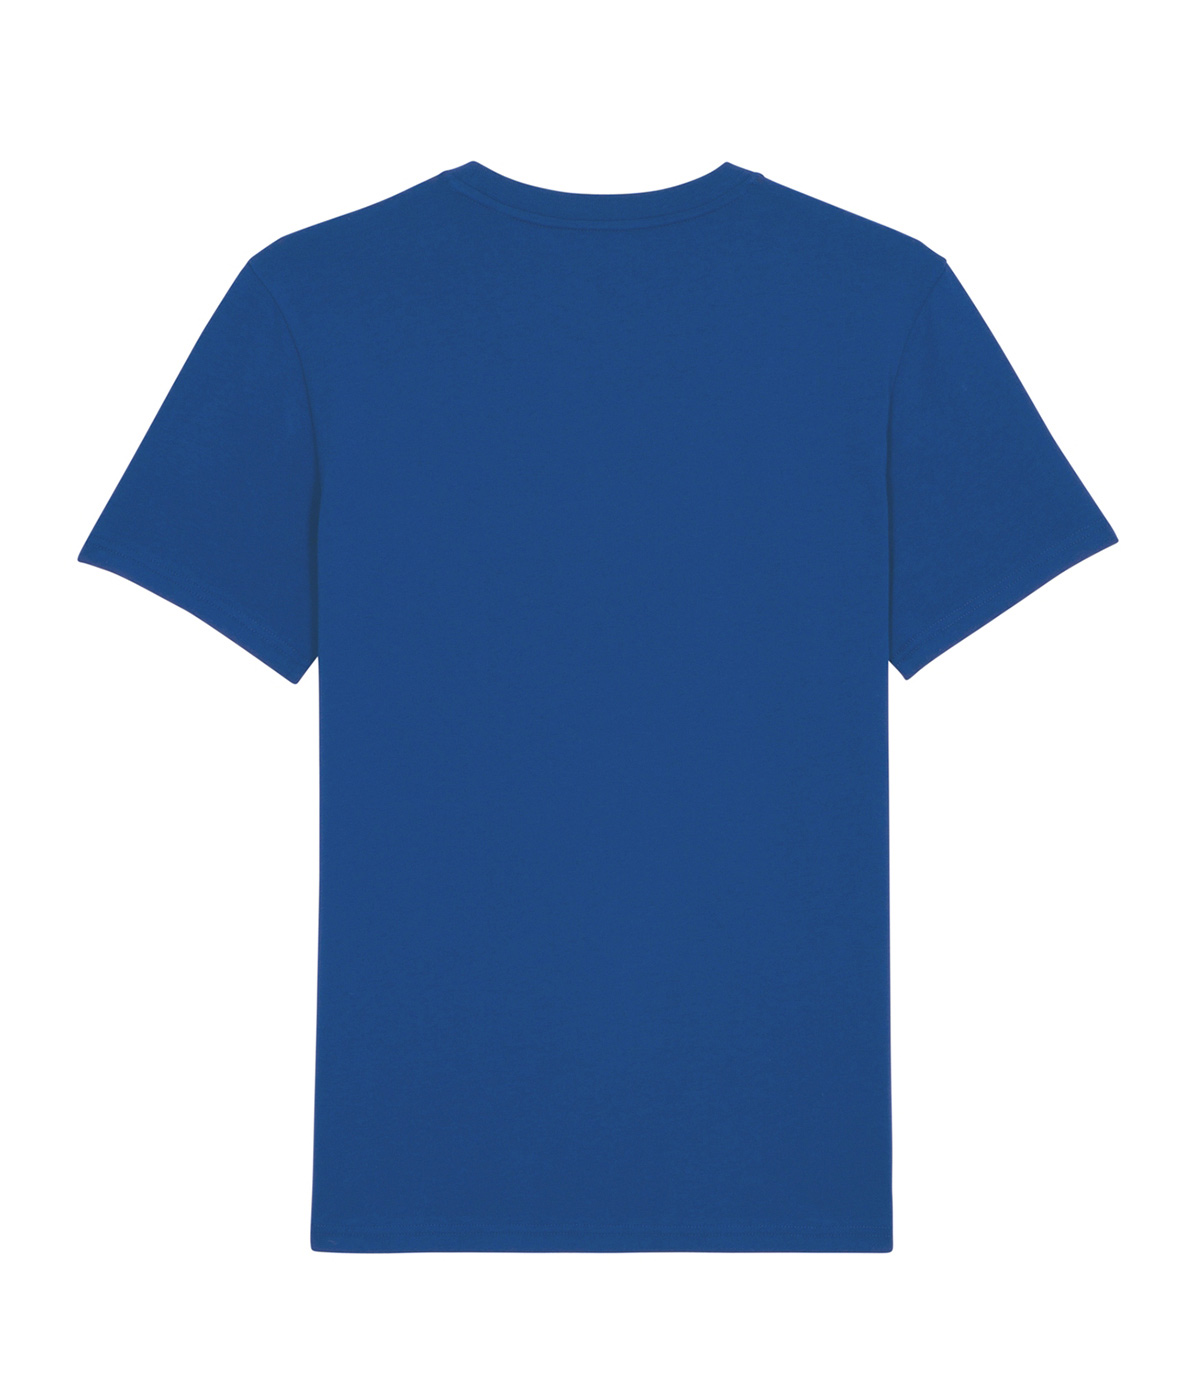 The back of a blue organic cotton t-shirt, unisex fit and round neck, designed by Mauverien.